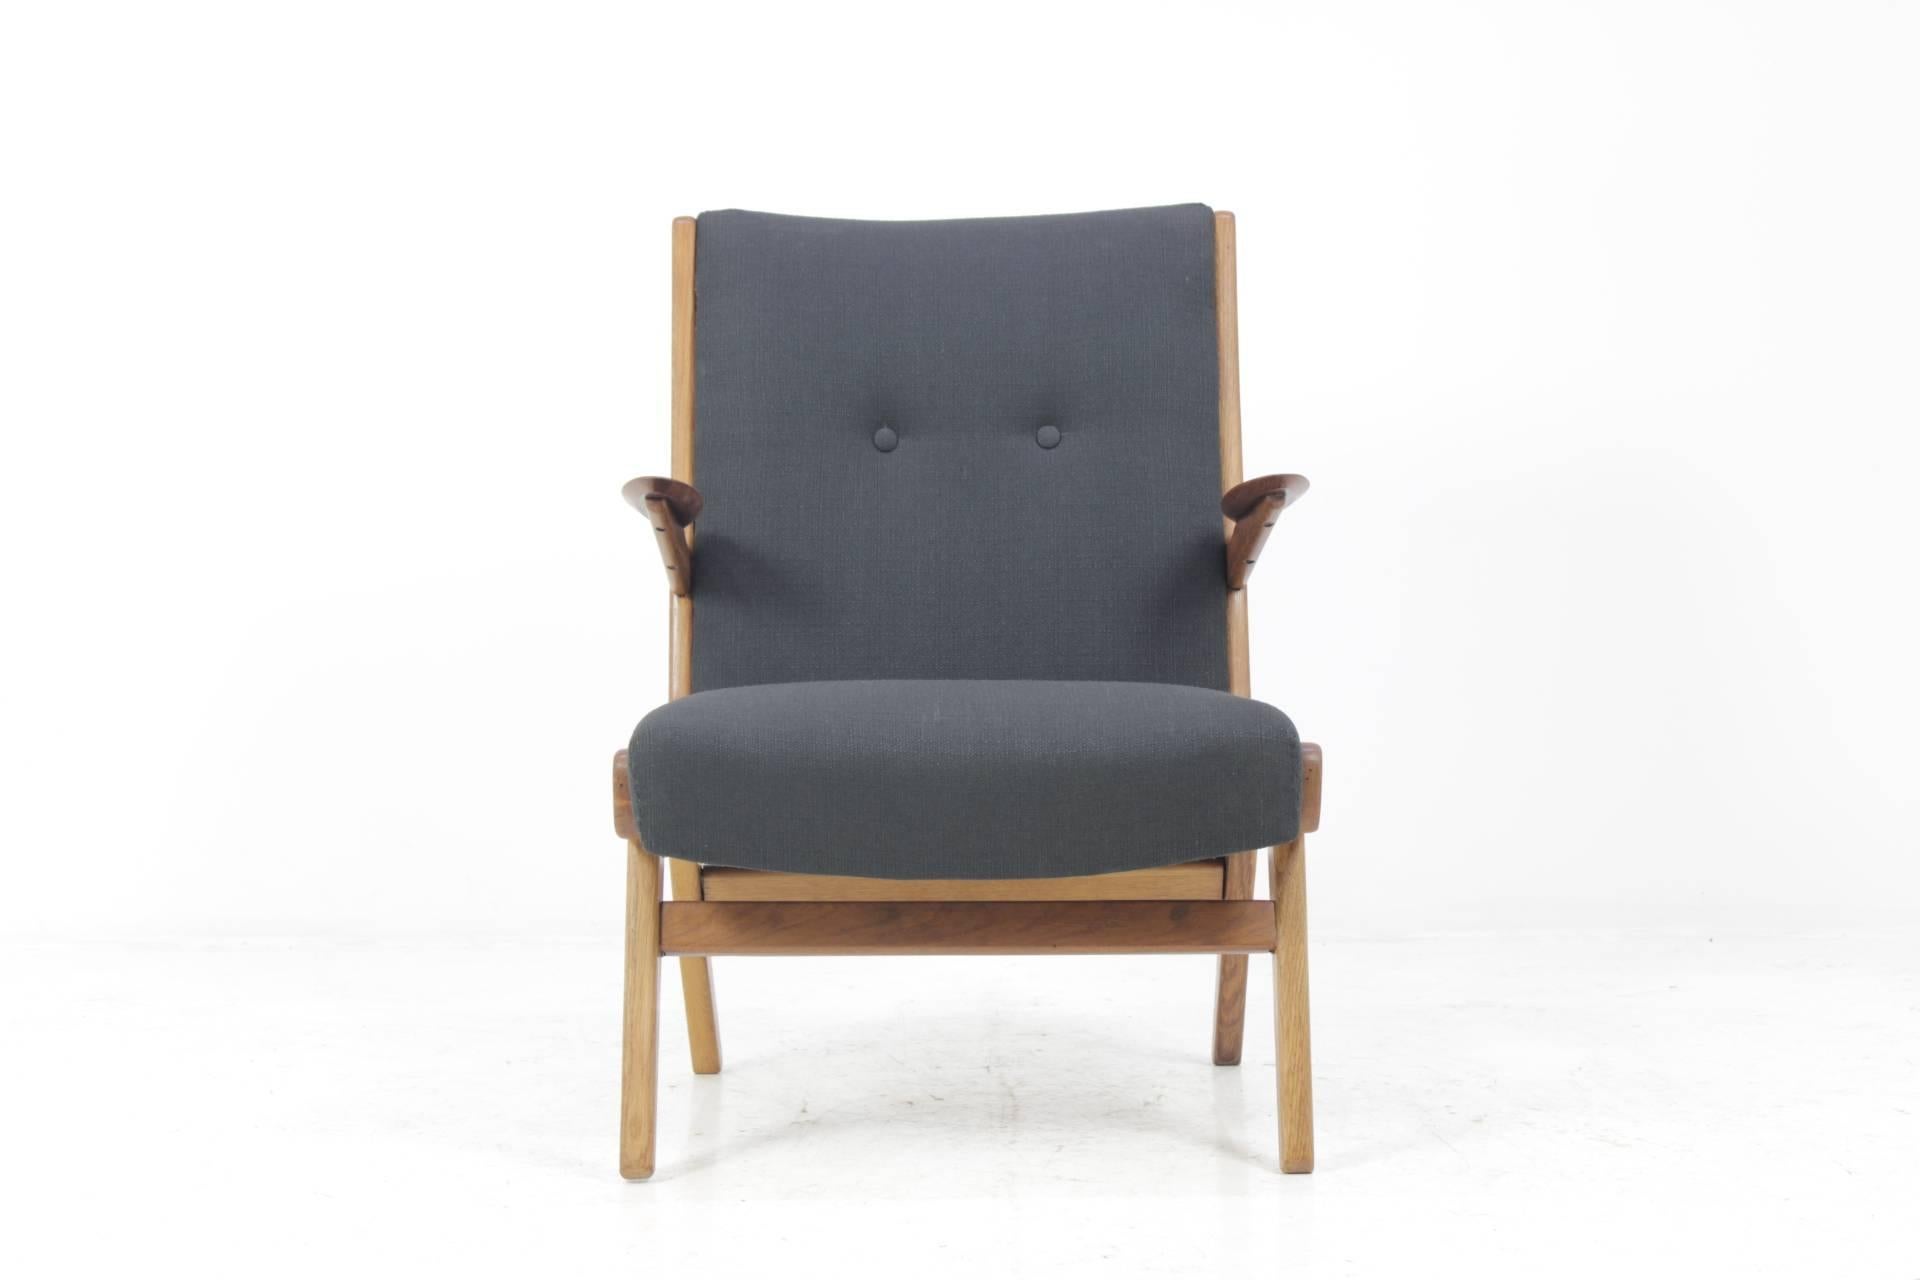 The chair features wooden oak frame and new fabric upholstery .Very good condition